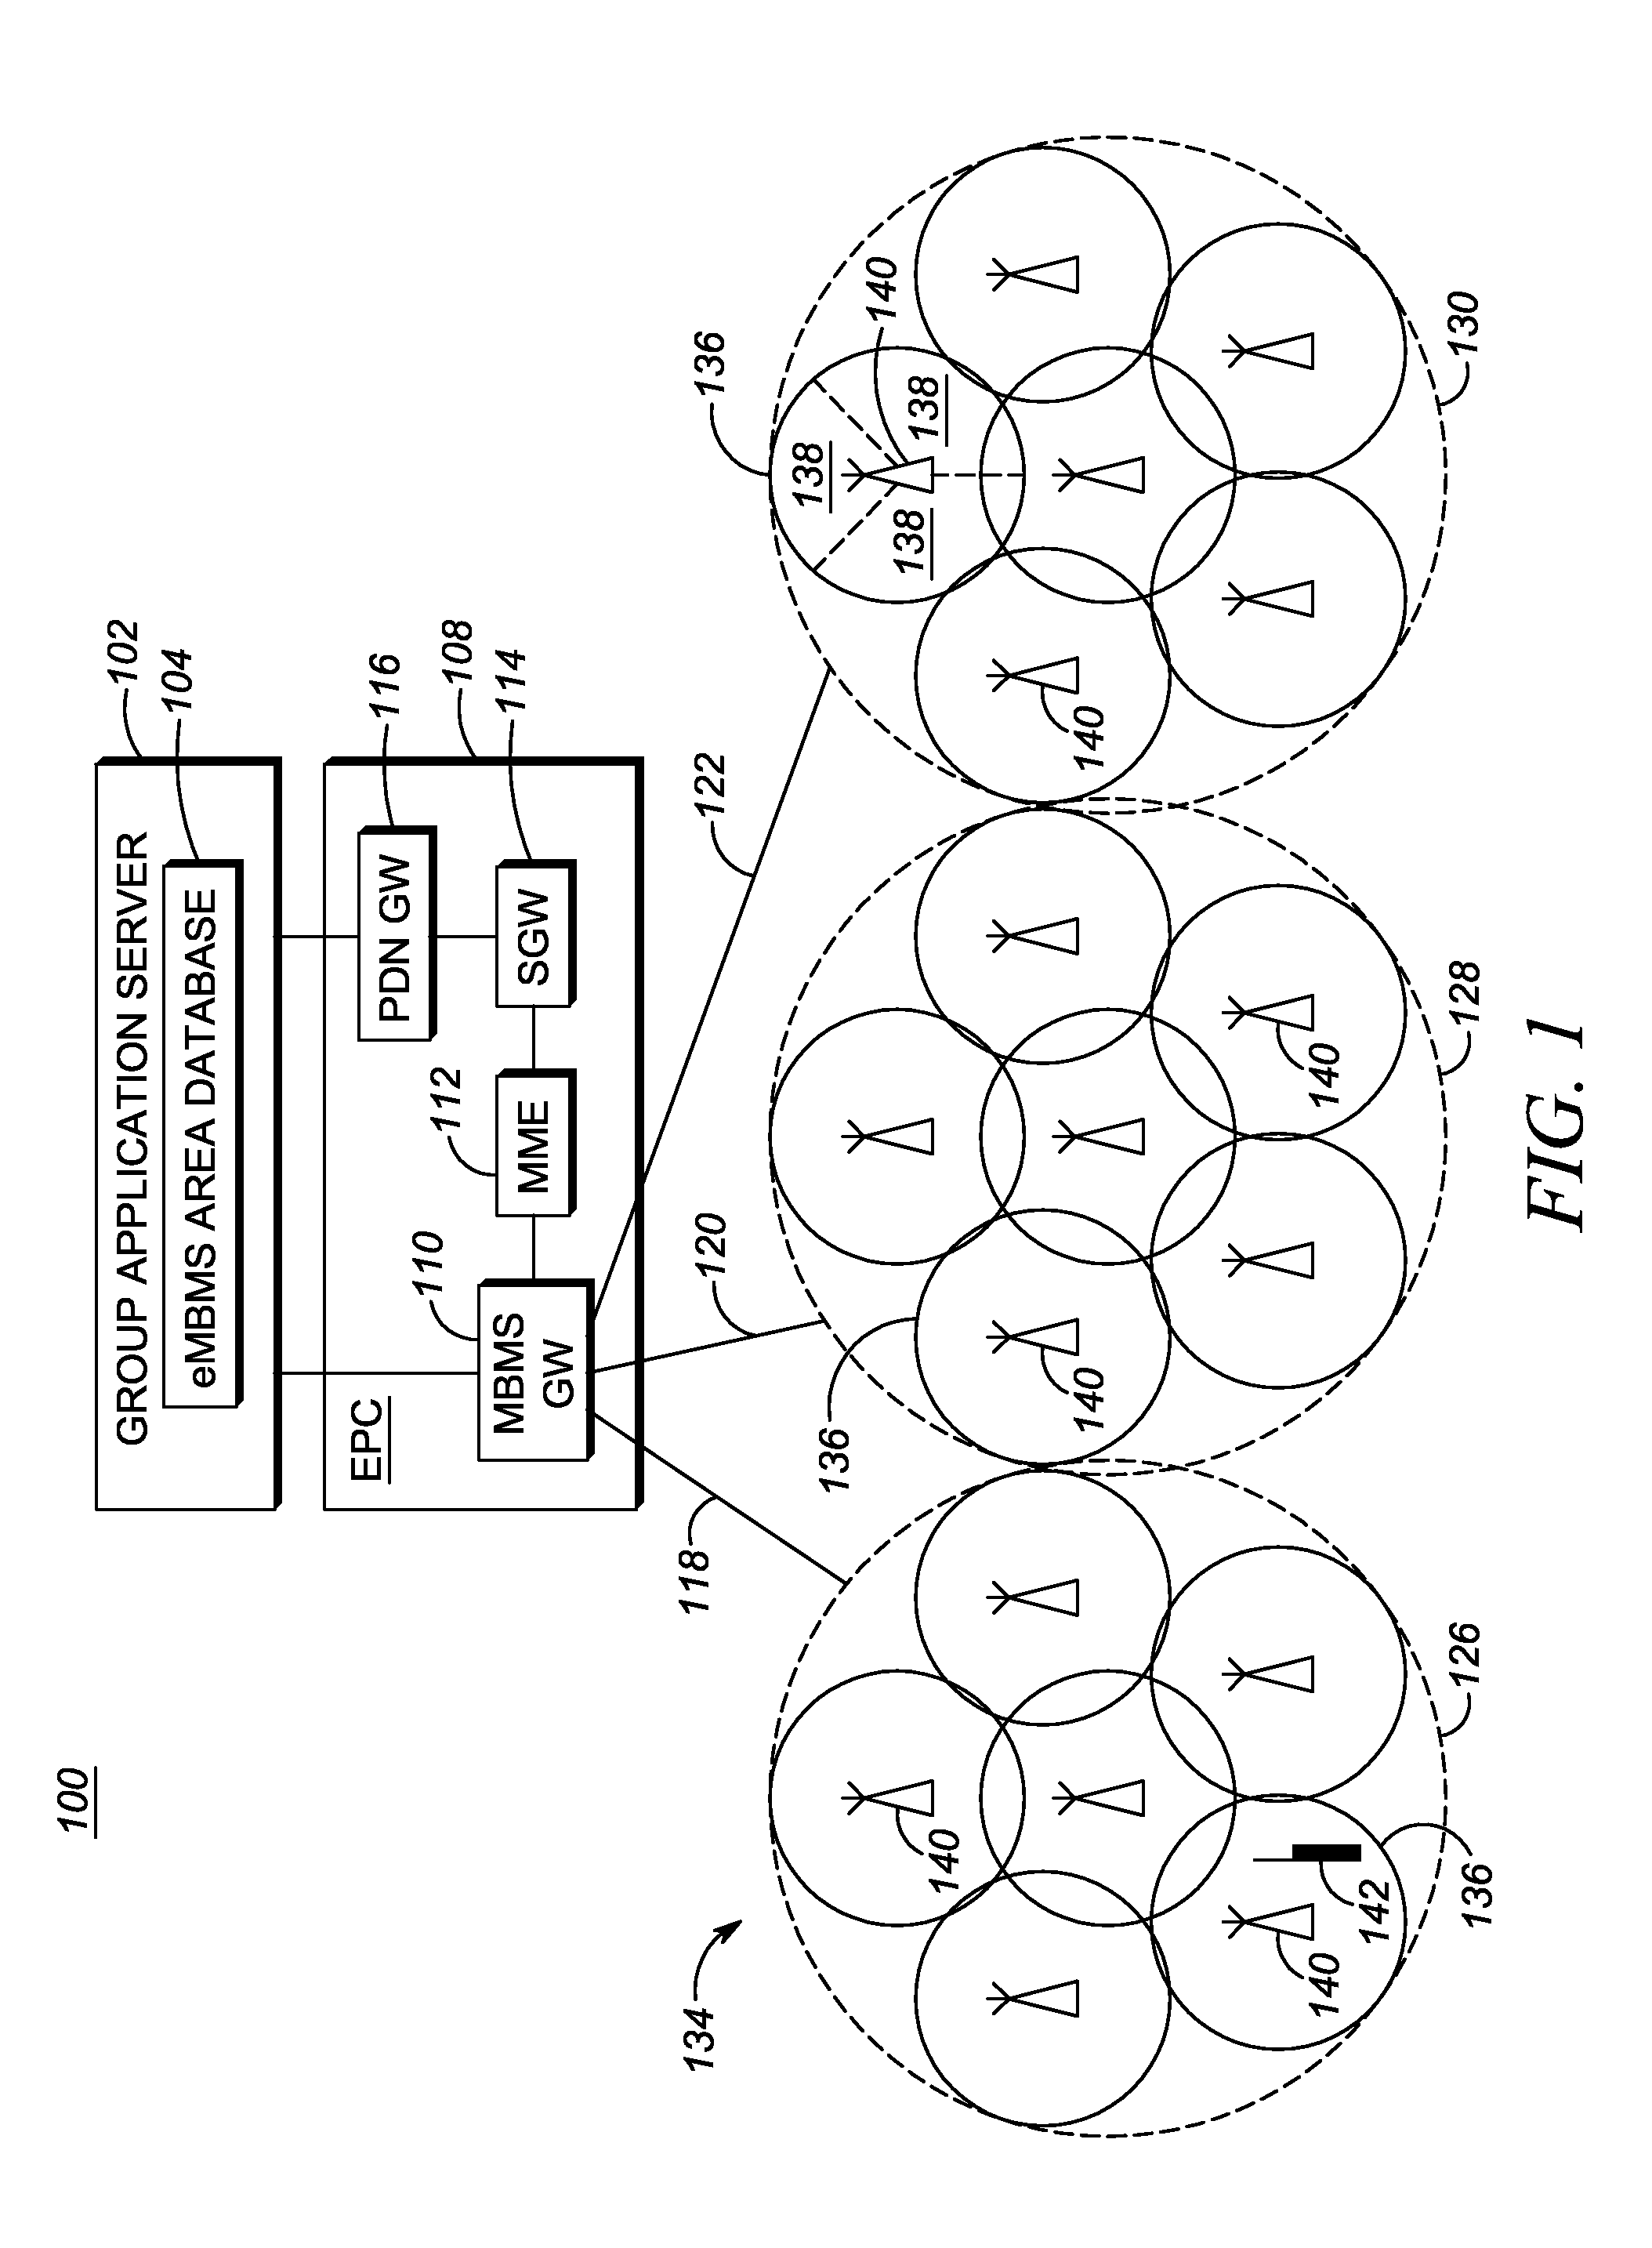 Method and apparatus for identifying a multimedia broadcast/multicast service (MBMS) area in a wireless communication system